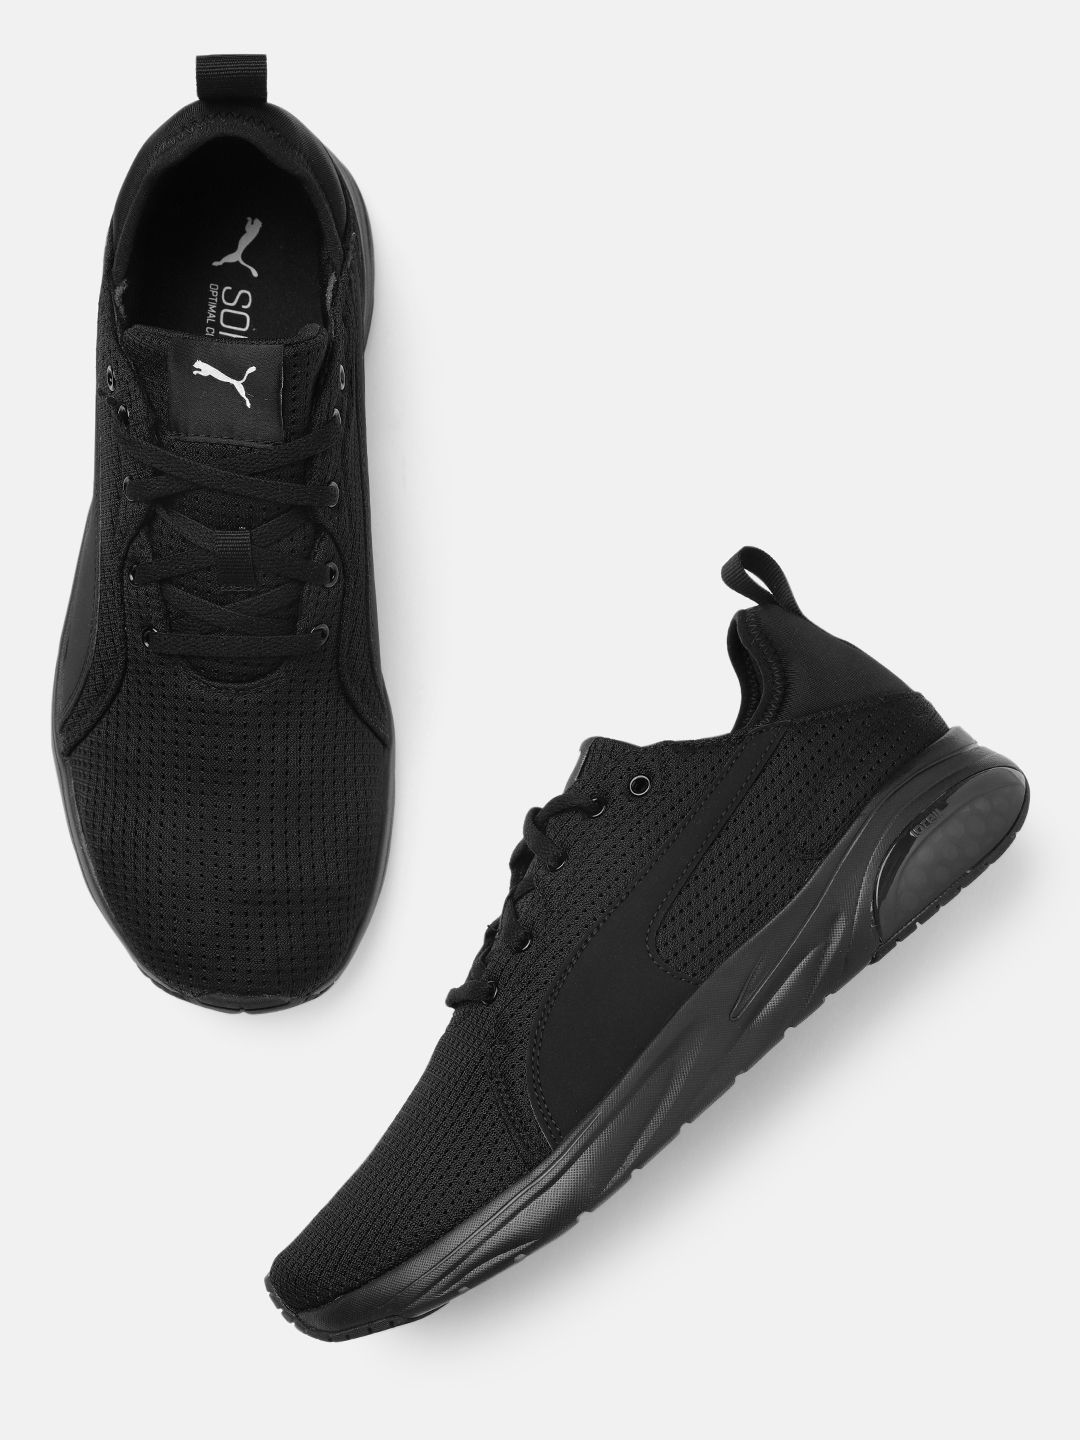 Puma Unisex Black Solid Cell Moderate Regular Running Shoes Price in India